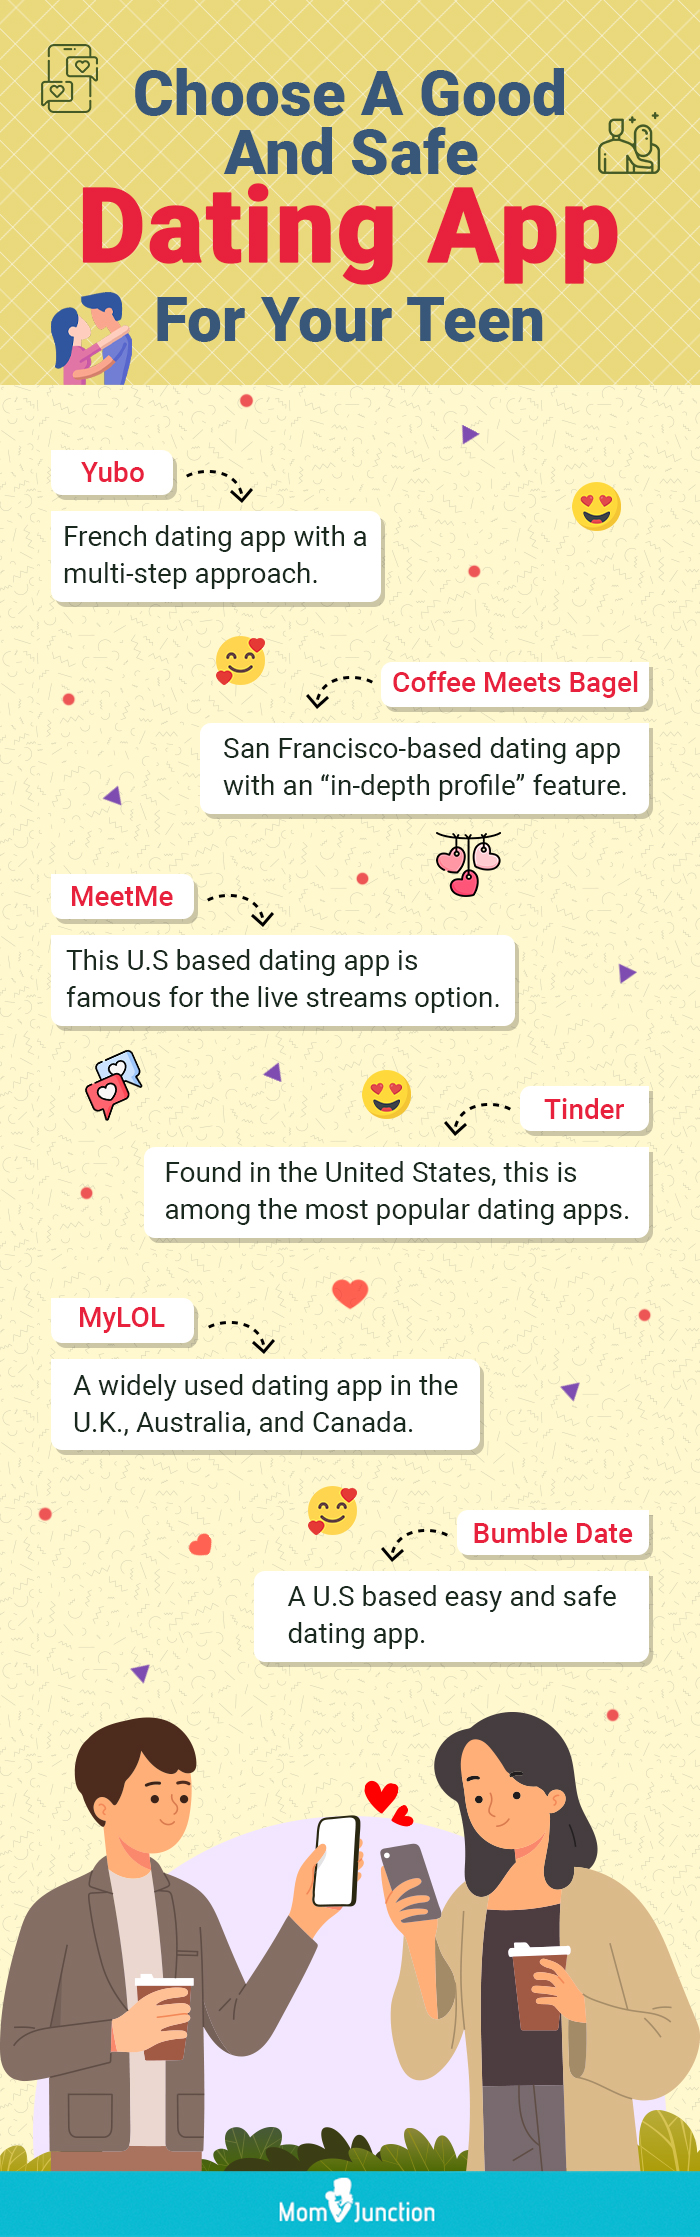 dating apps no good choices